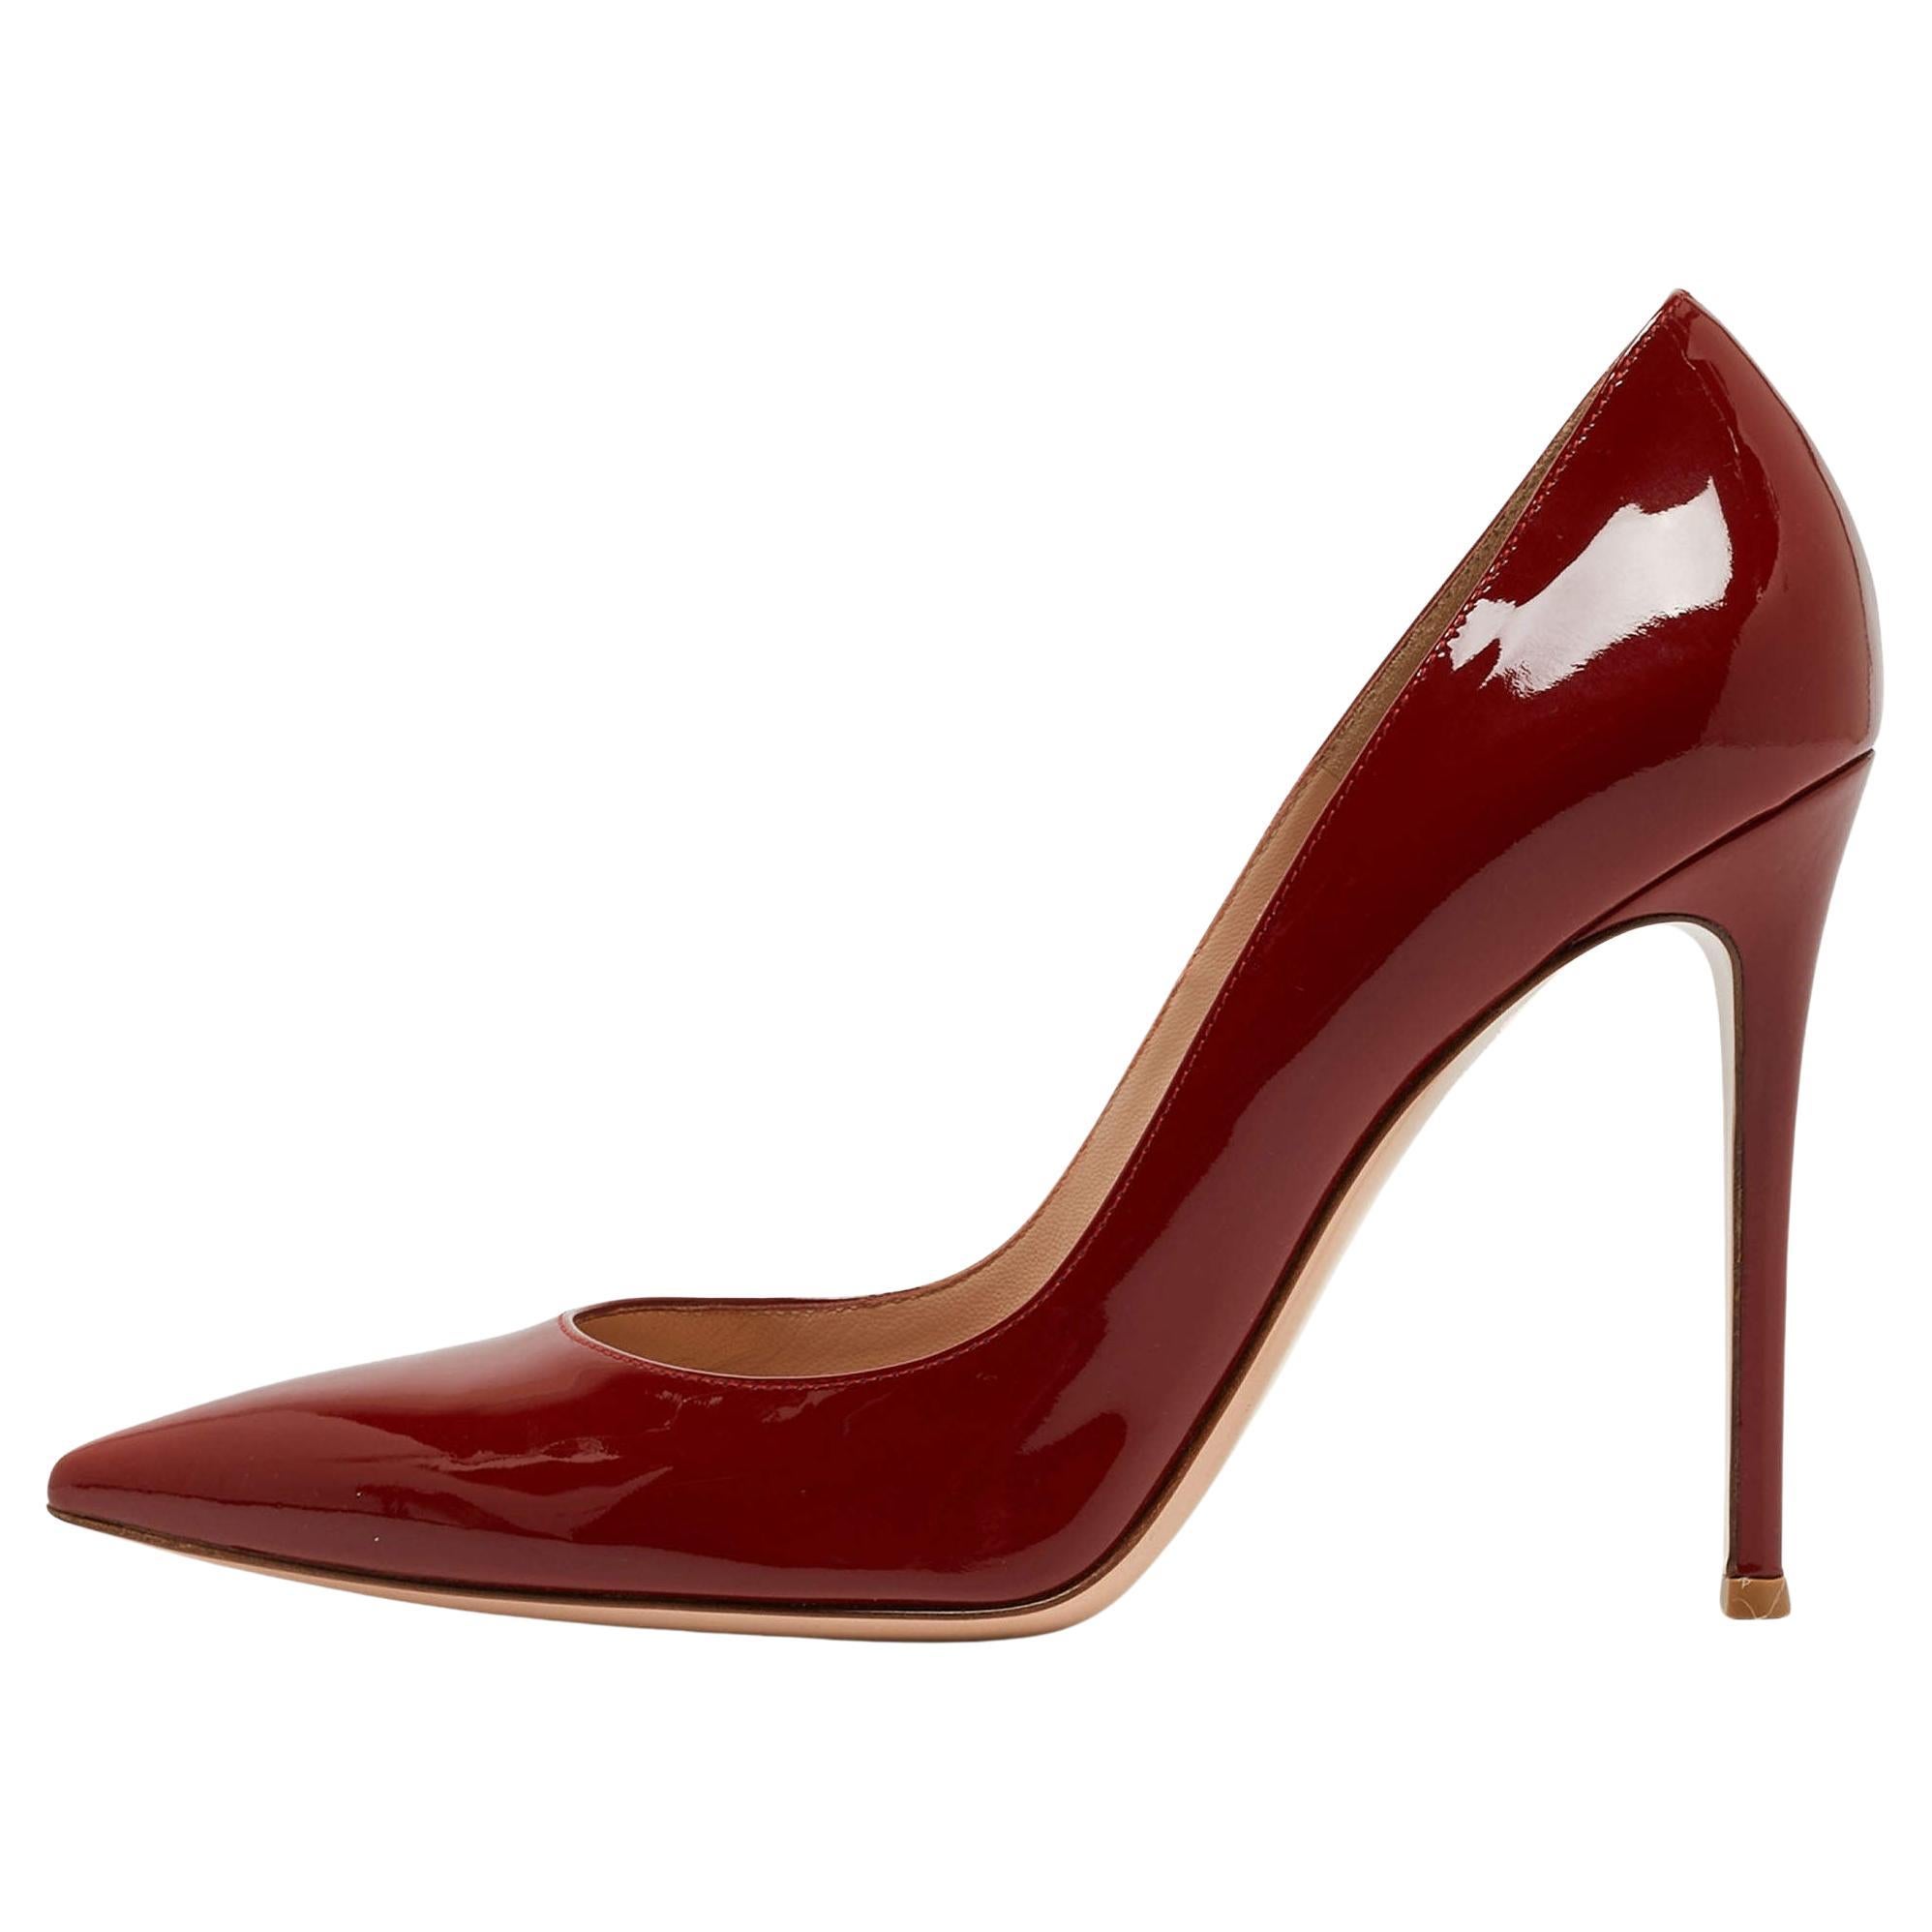 Gianvito Rossi Dark Red Patent Leather Pointed Toe Pumps Size 41